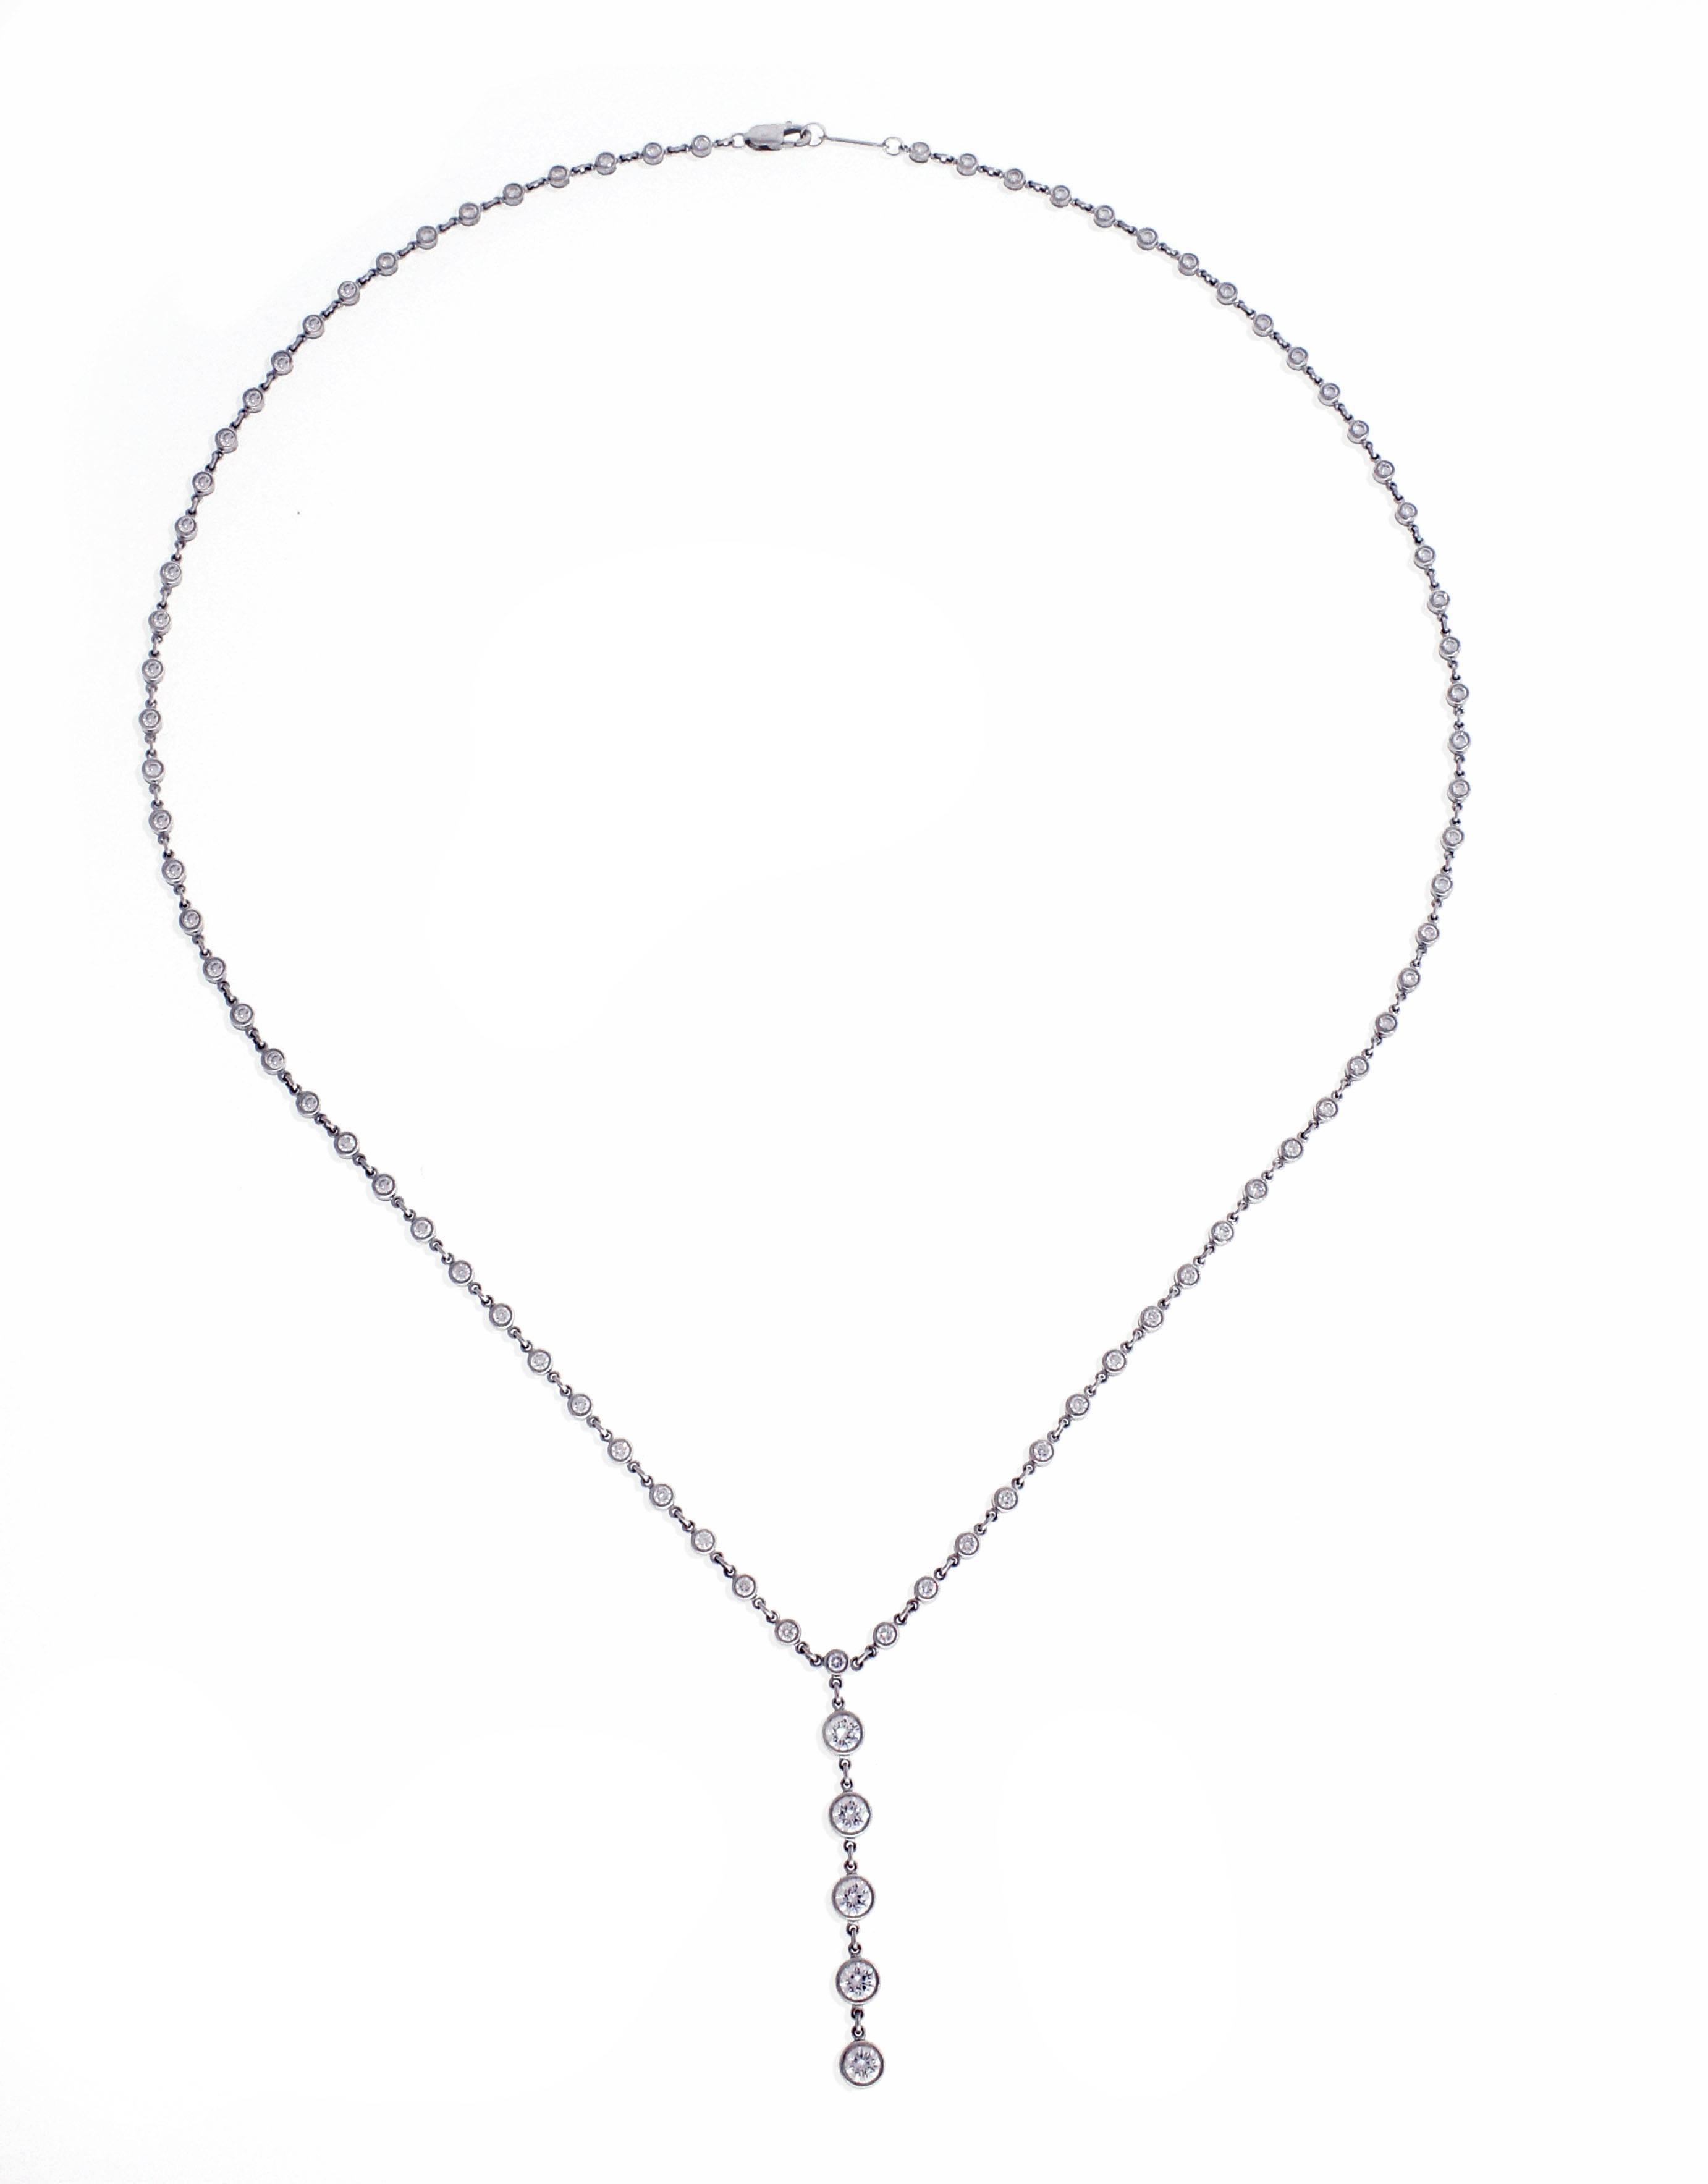 Tiffany Jazz has rhythm. The necklace is comprised of 2.08 carats of brilliant Tiffany diamonds. Set in platinum, 18